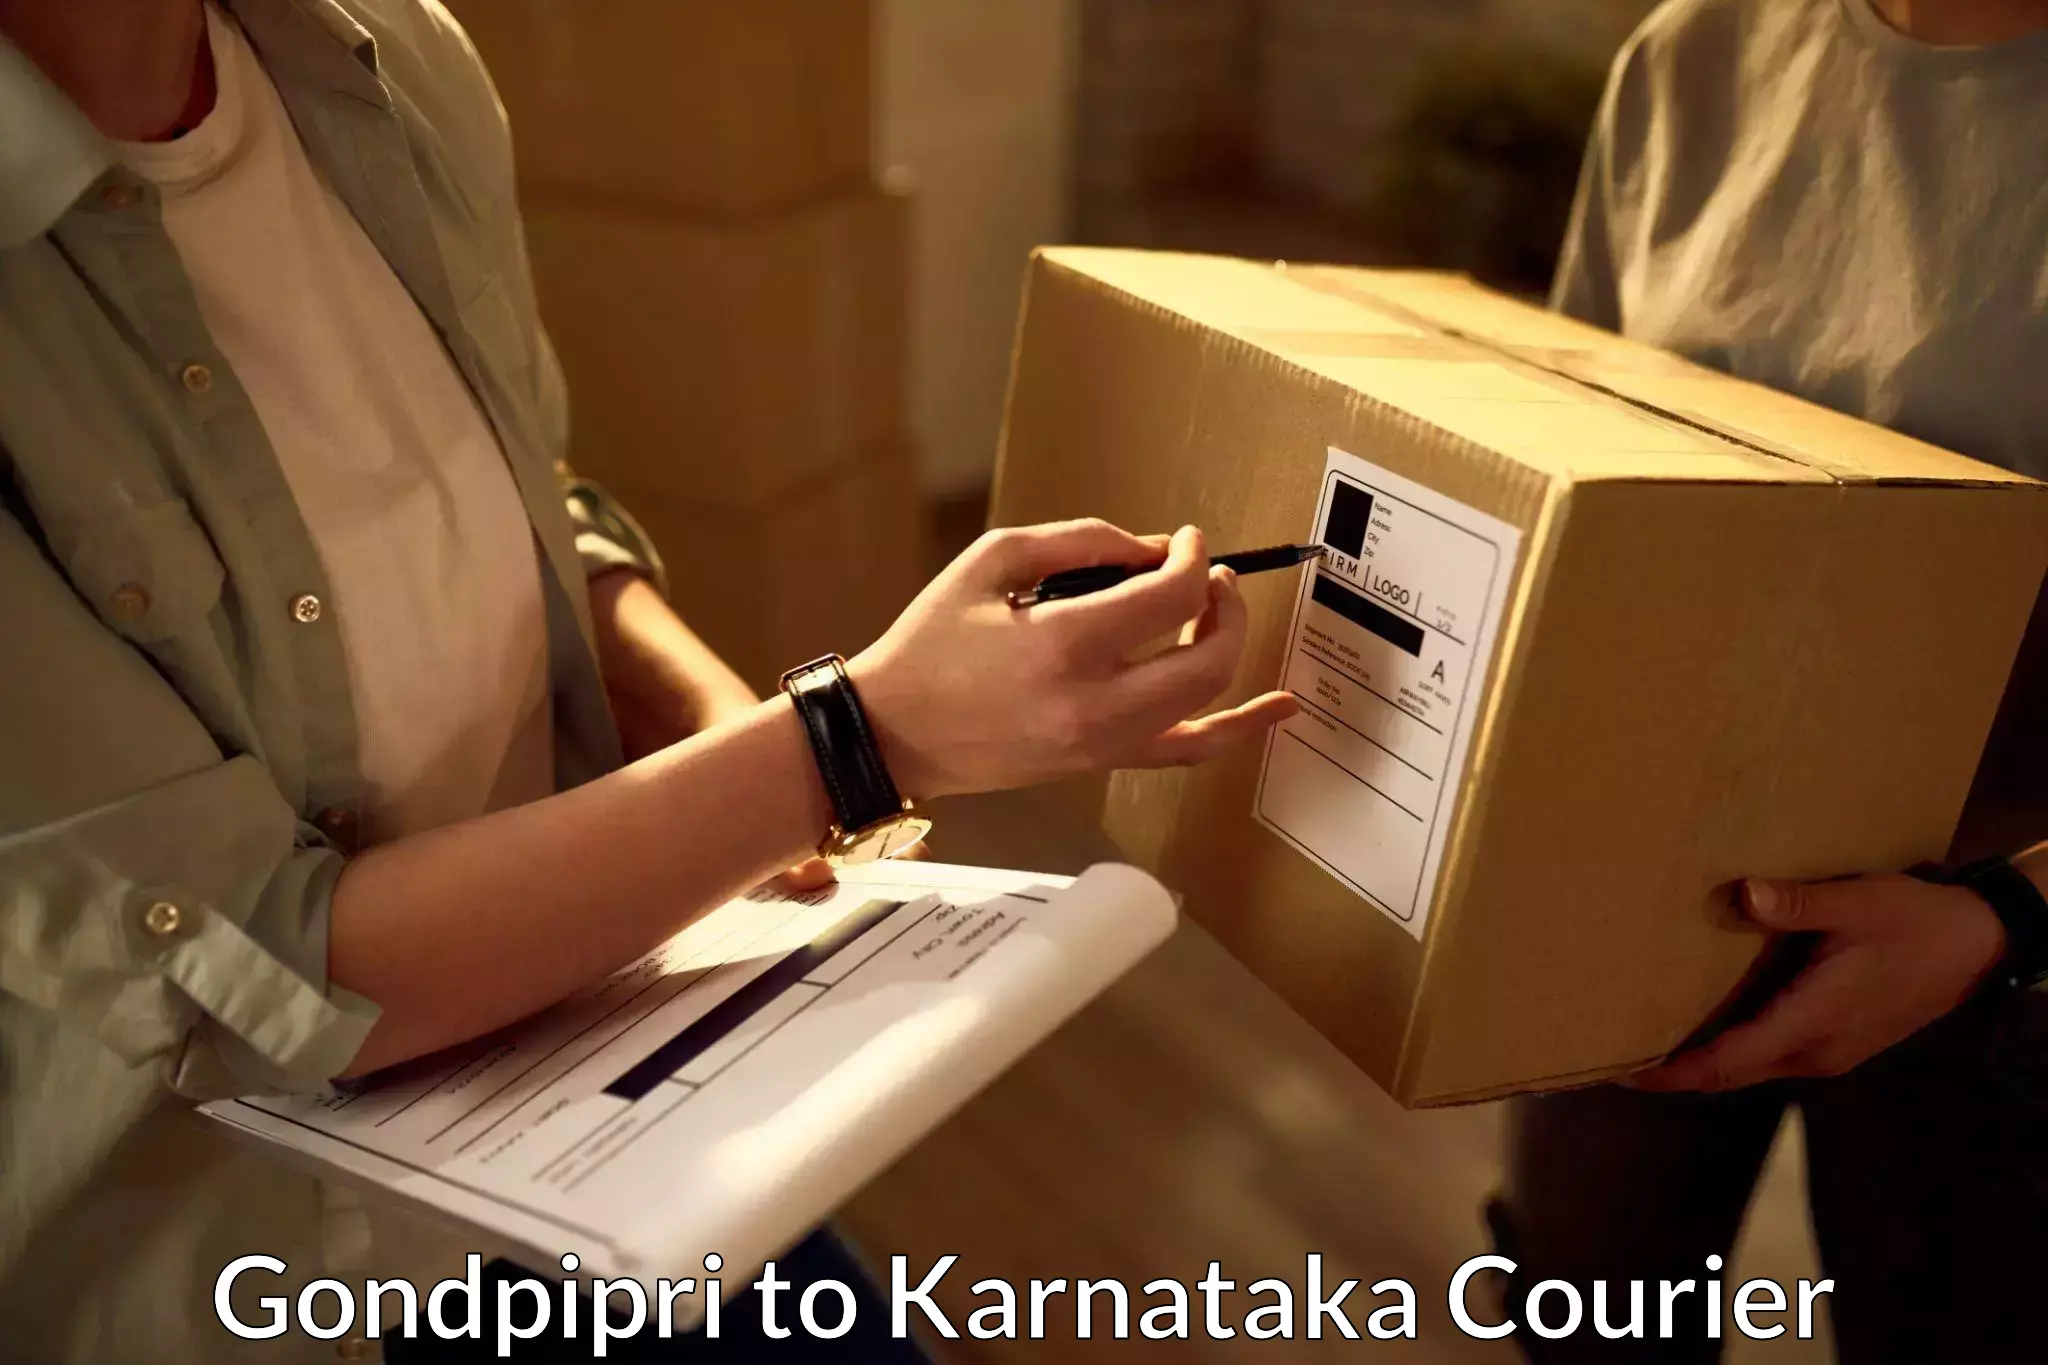 Comprehensive shipping services Gondpipri to Manipal Academy of Higher Education